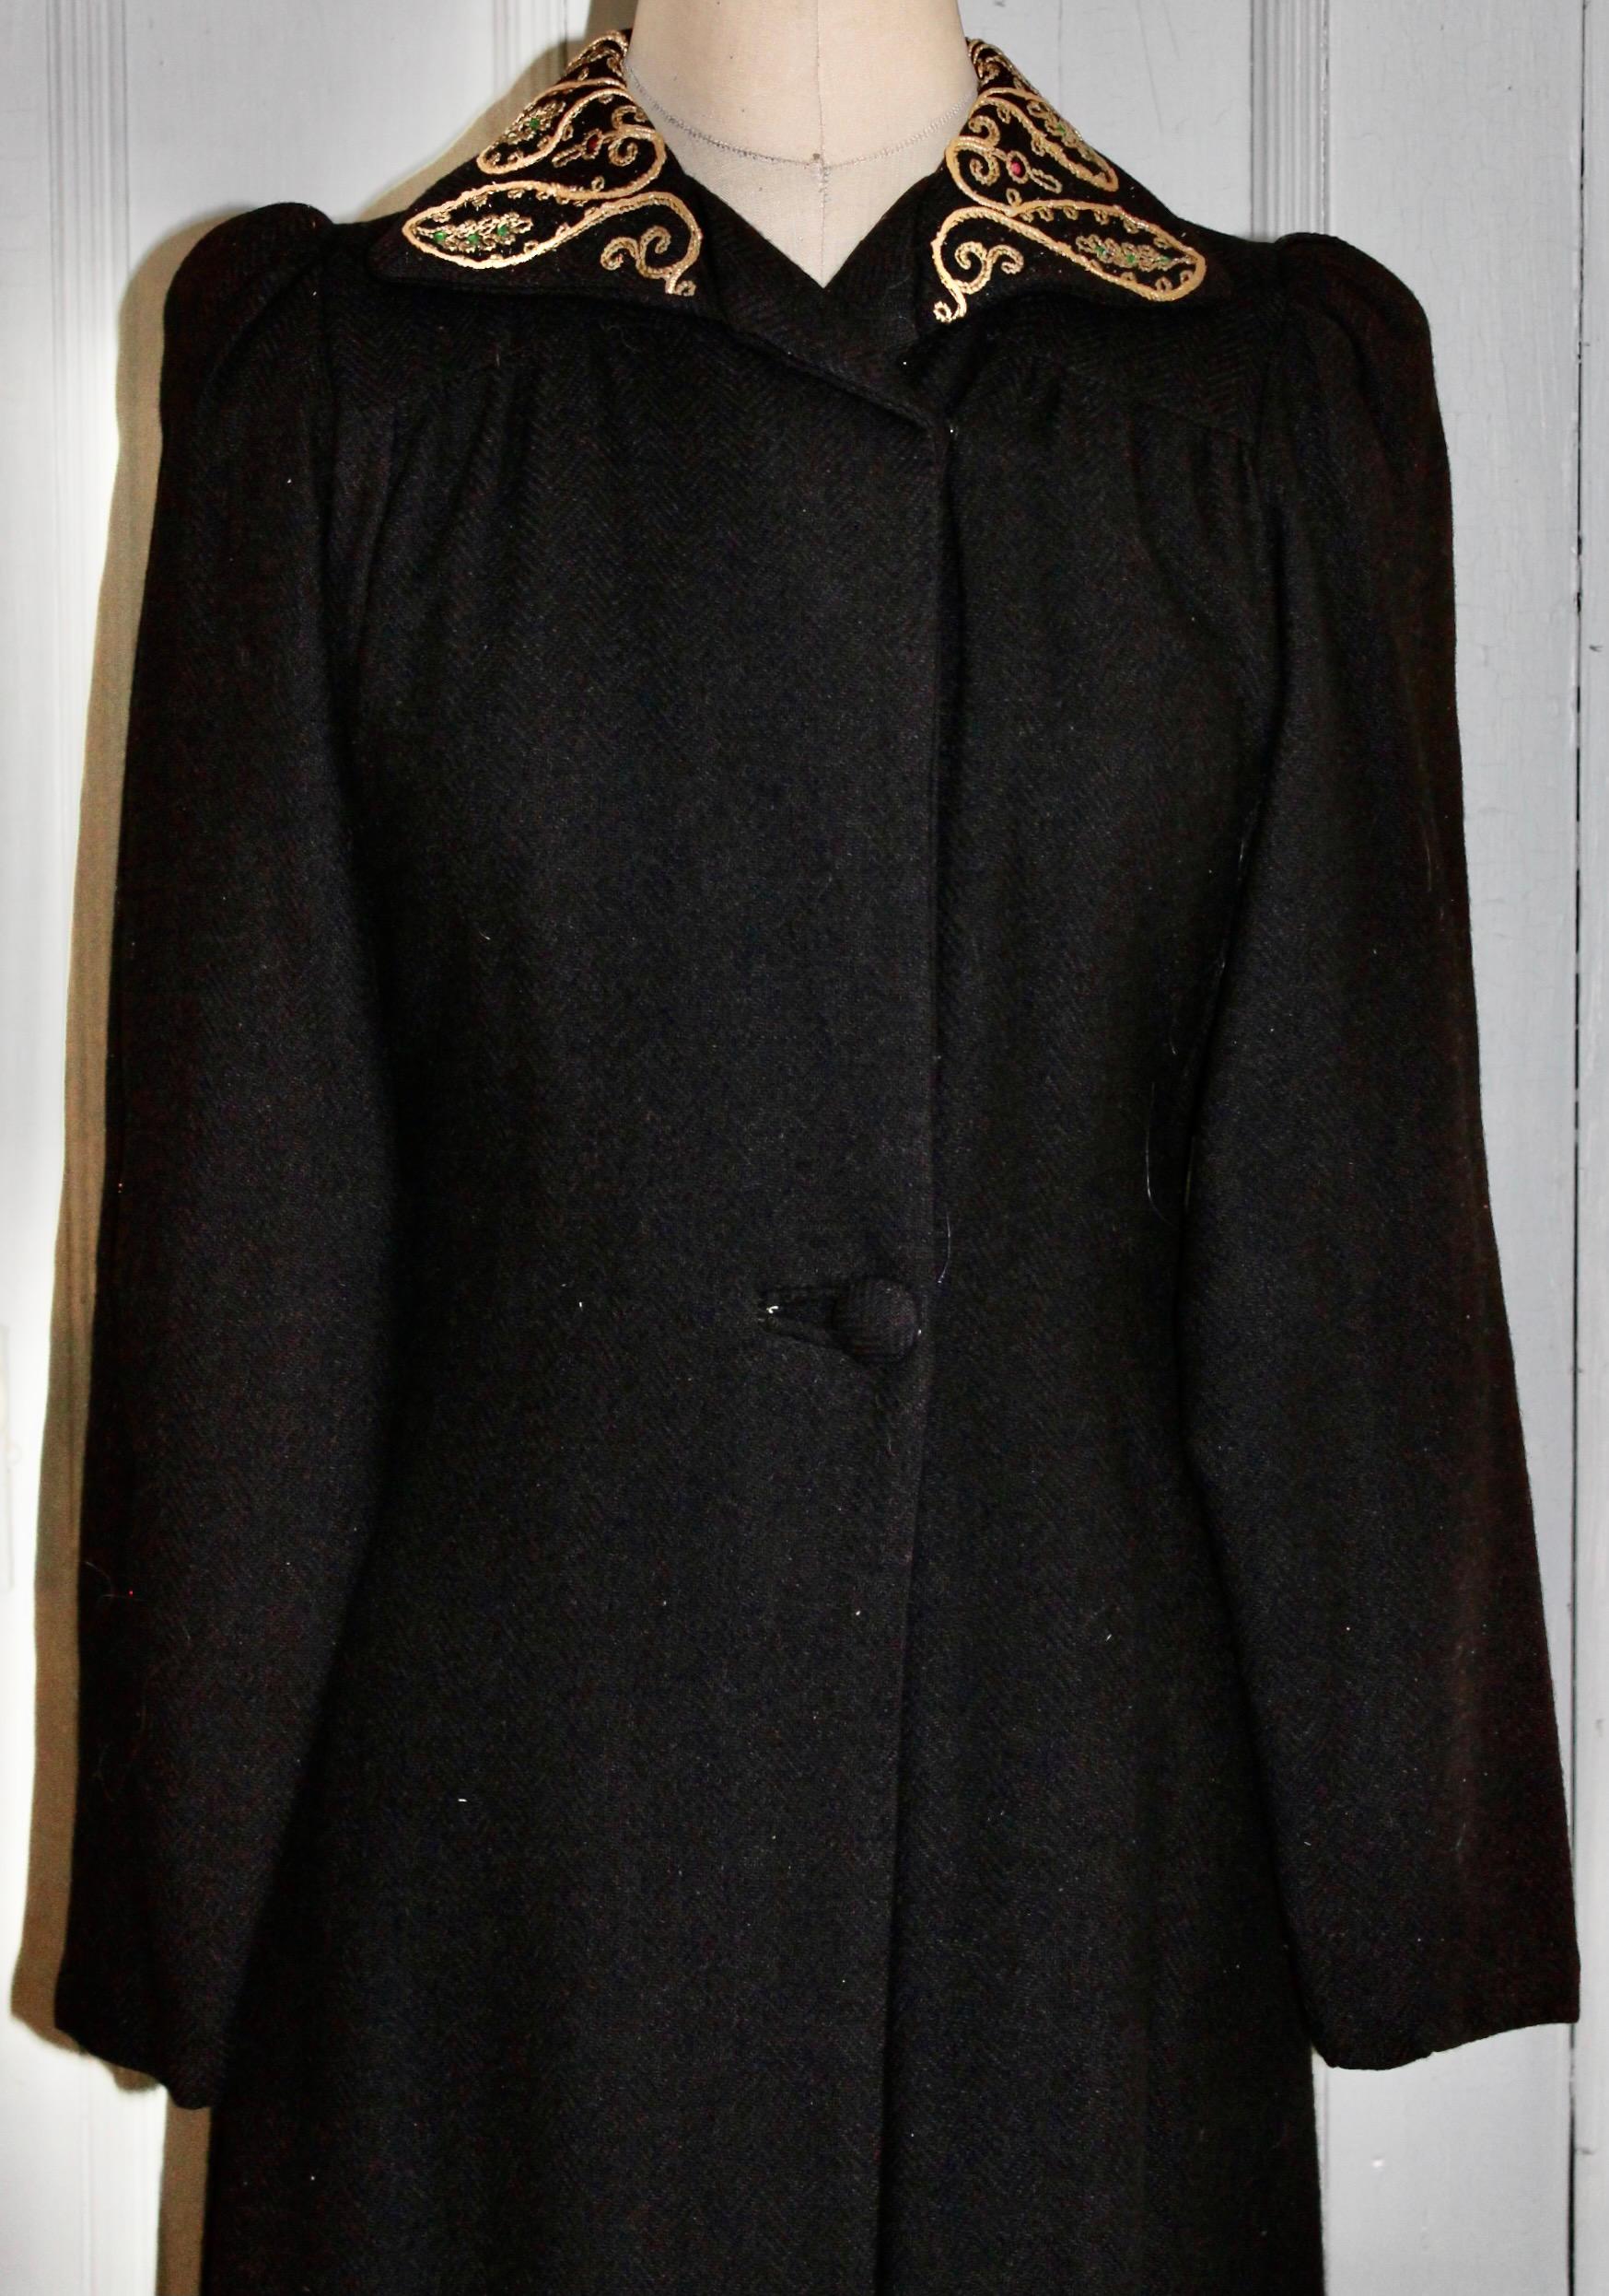 A long black Edwardian coat with a gold embroidered Indian motif collar, with faux red and green 'stones'. Slim fitted and long sleeves. Slightly padded shoulders.